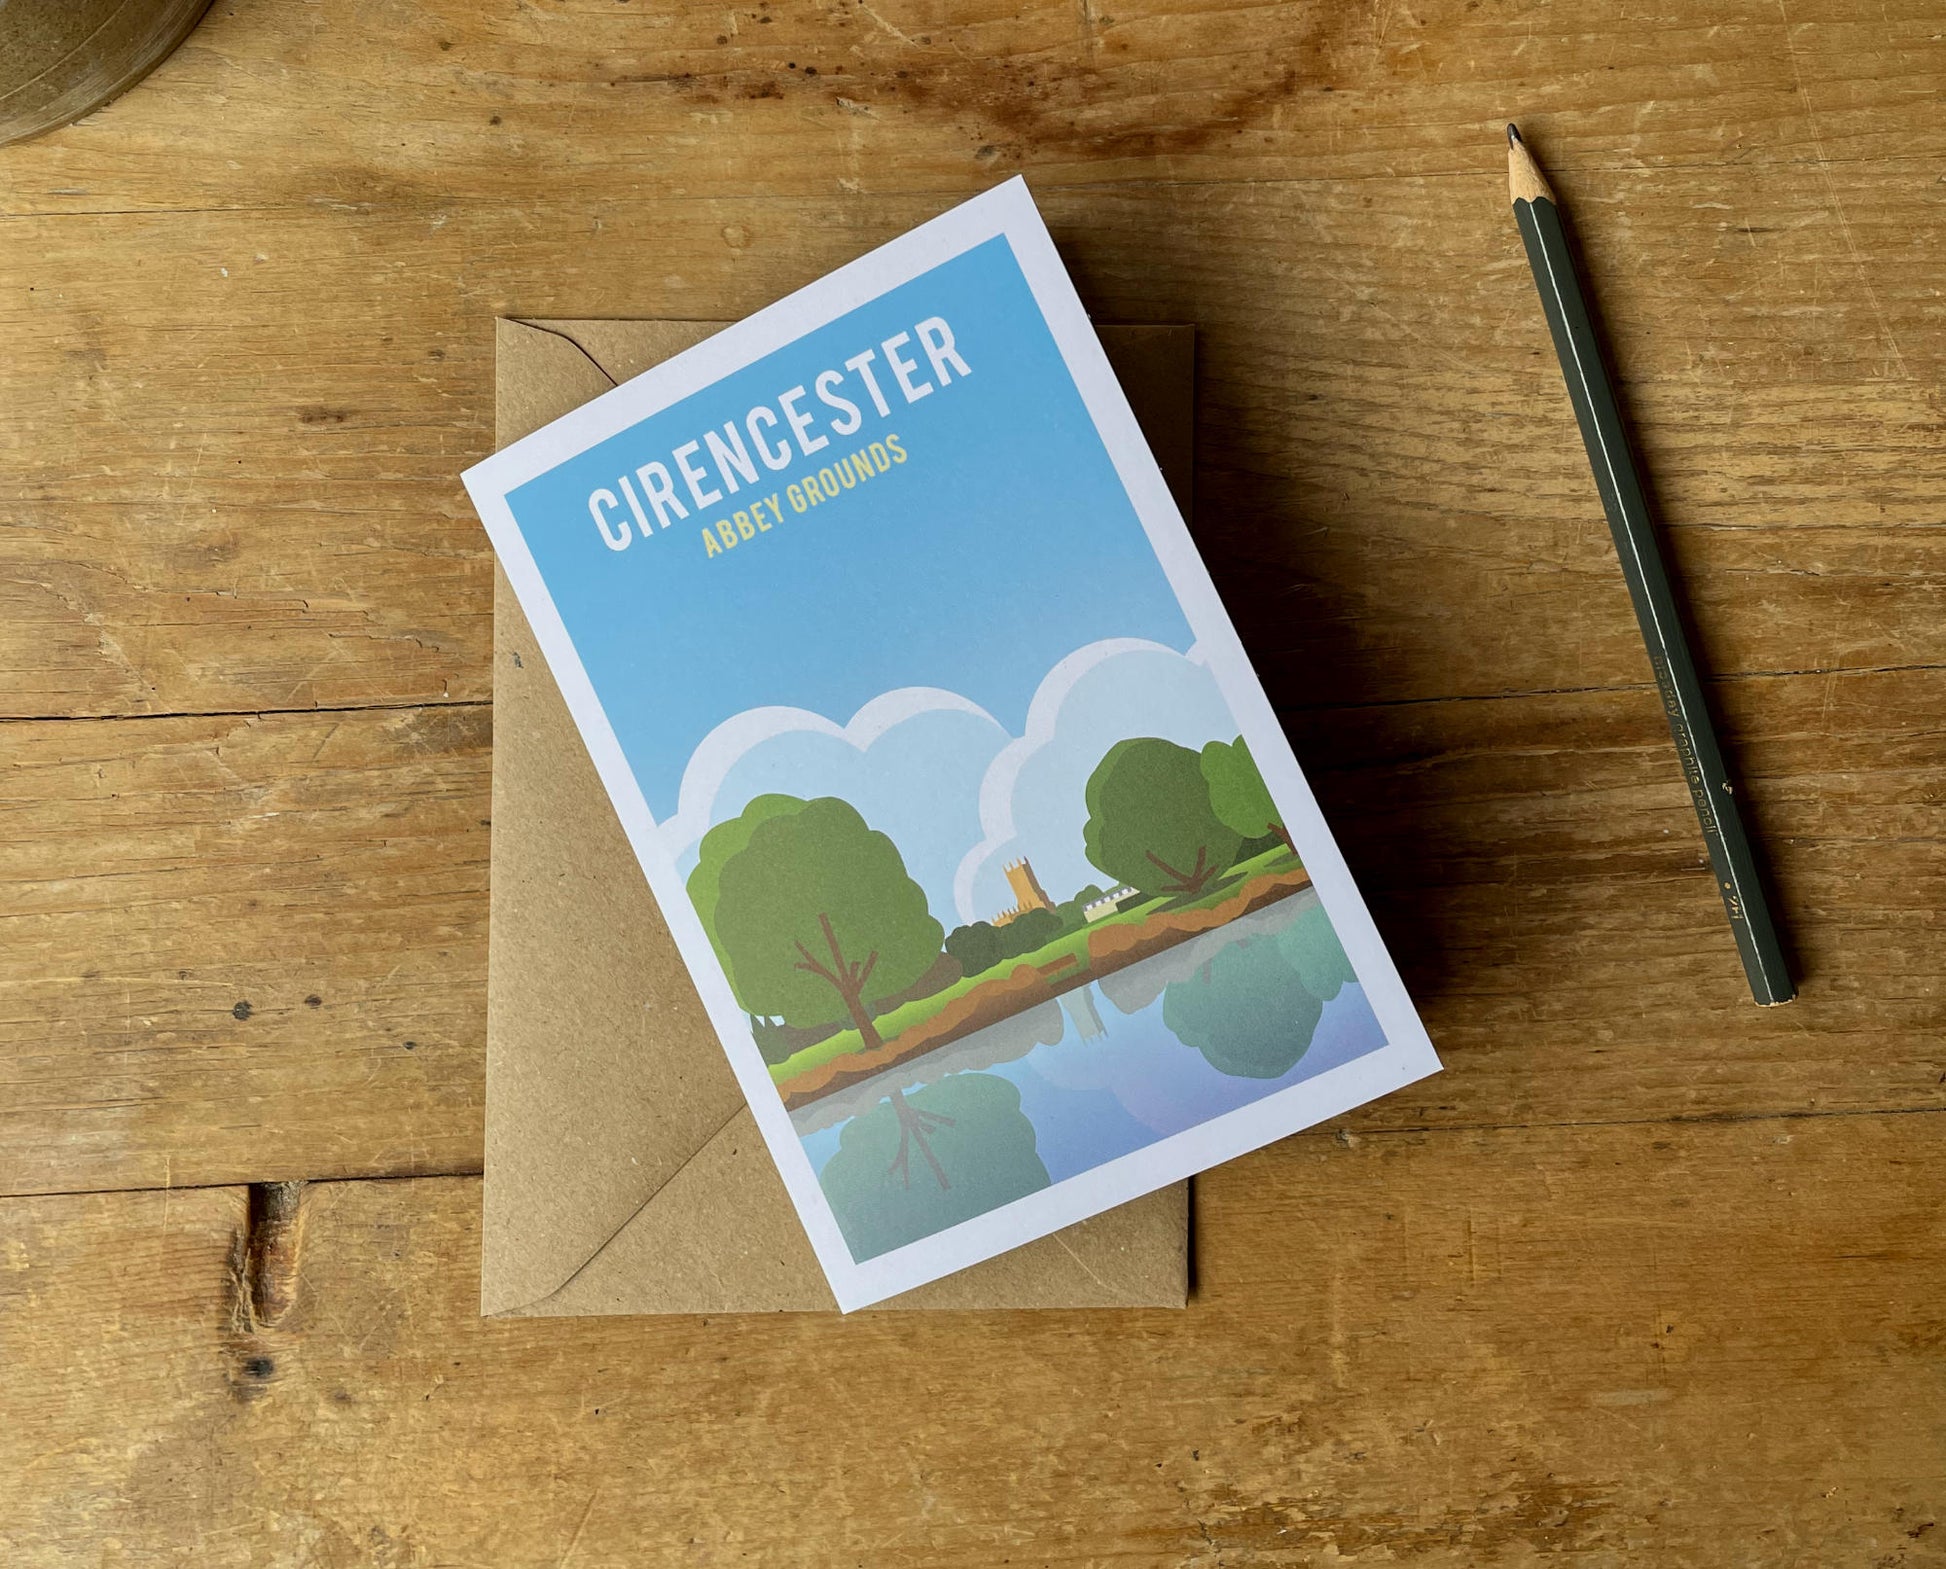 Cirencester Abbey Grounds Greeting Card on a desk